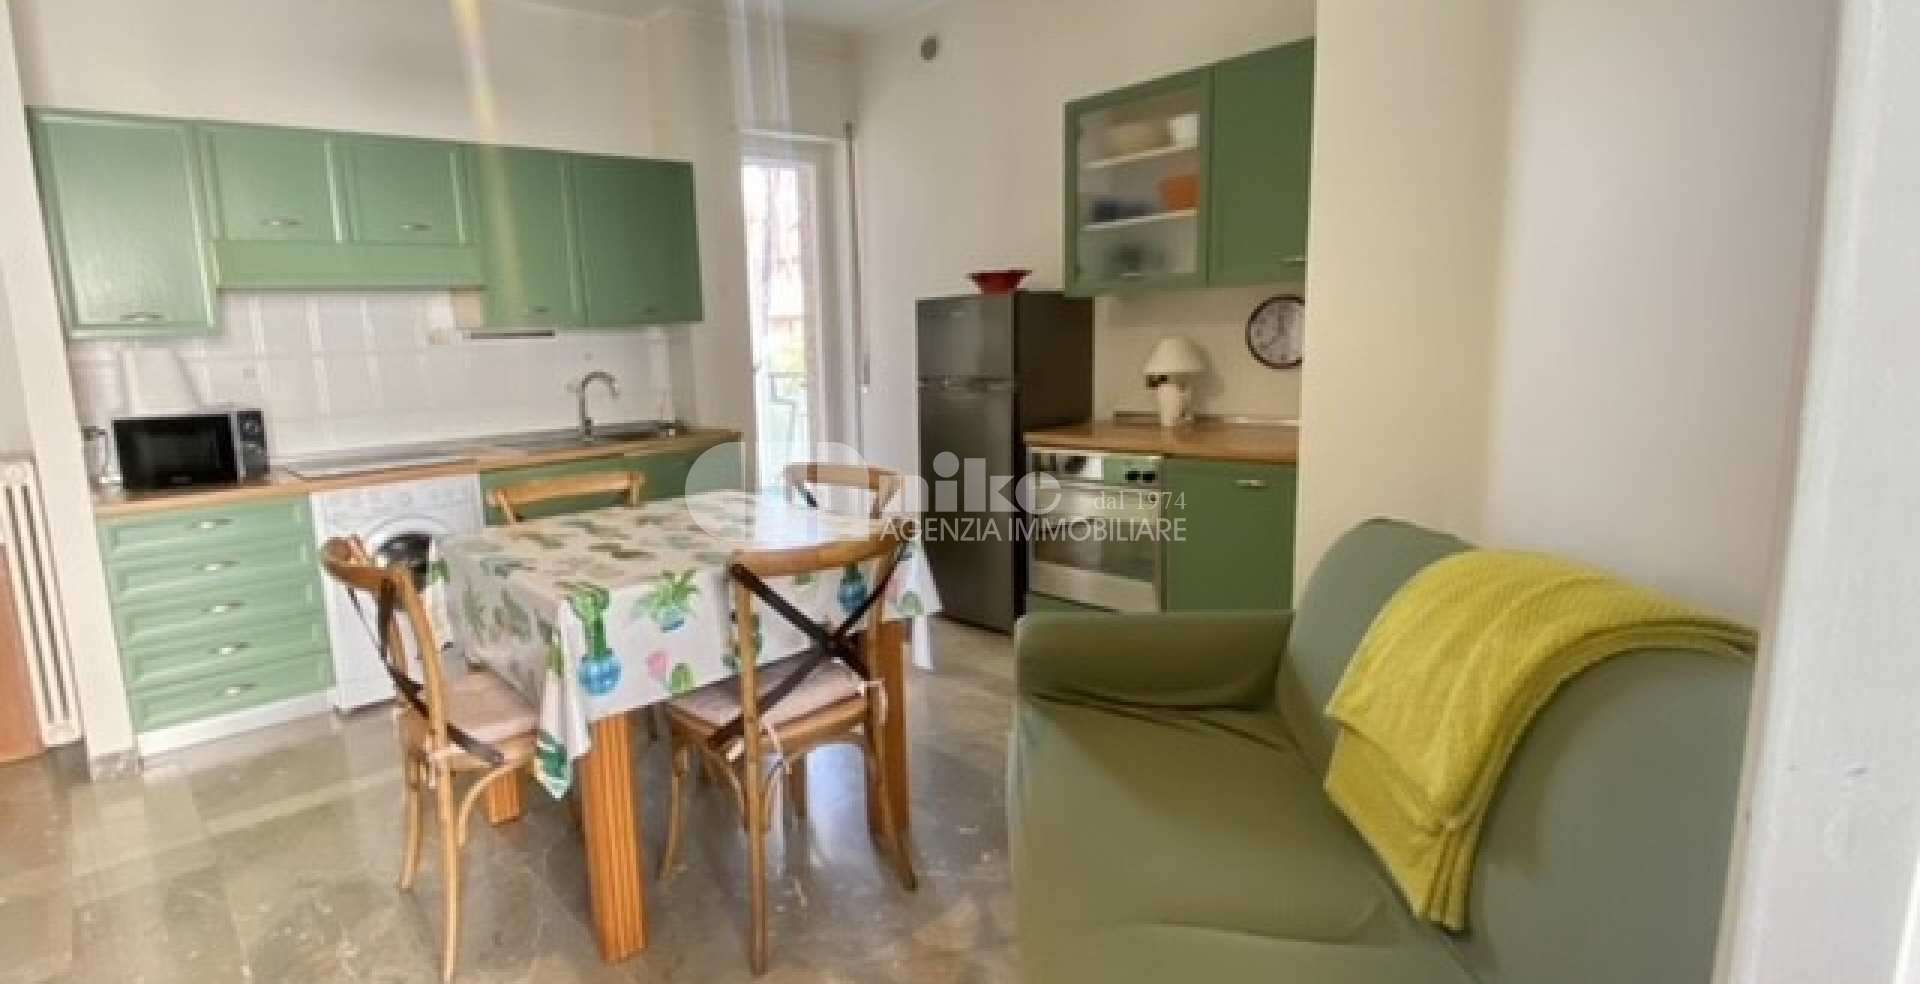 TWO-ROOM APARTMENT IN A CENTRAL AREA